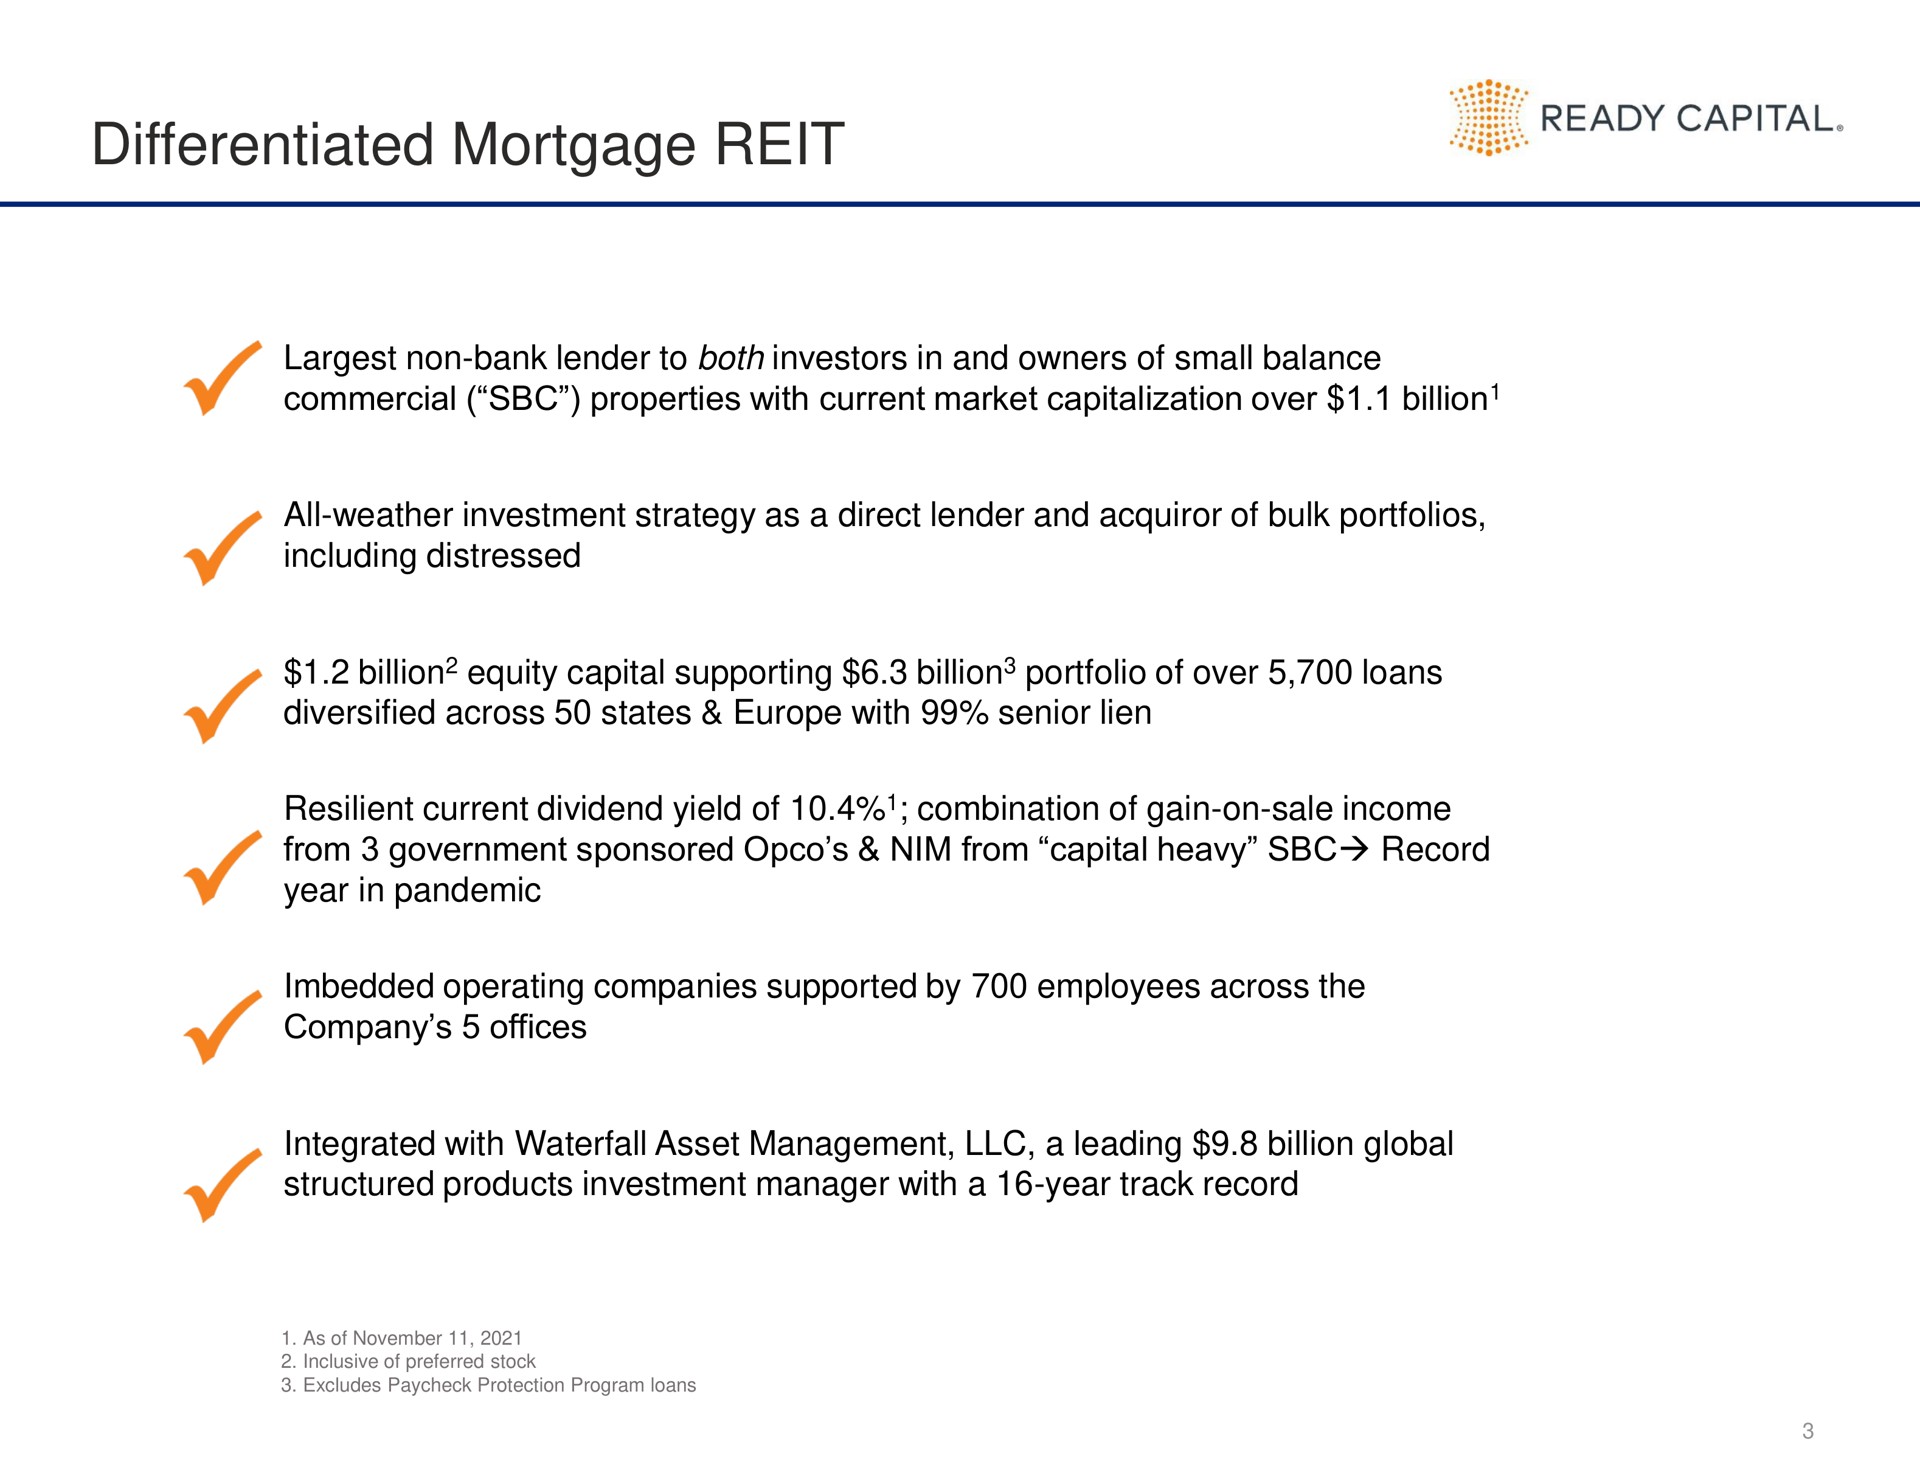 differentiated mortgage reit ready capital | Ready Capital